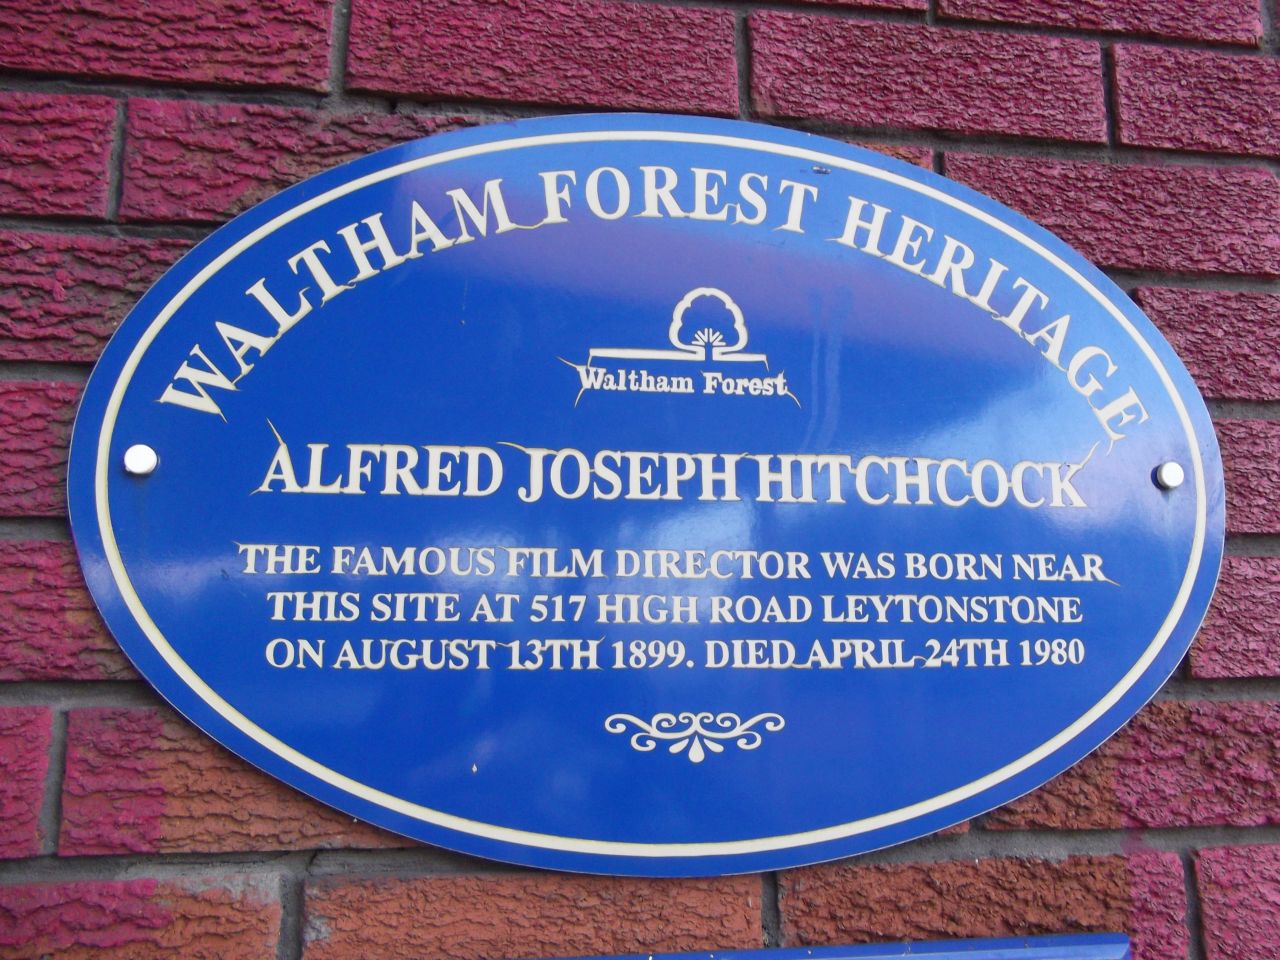 A blue plaque marks the site of Hitchcock's birthplace, above the family's greengrocer's shop at 517 High Road, Leytonstone. The building was demolished many years ago to make way for a petrol station and fried chicken shop.